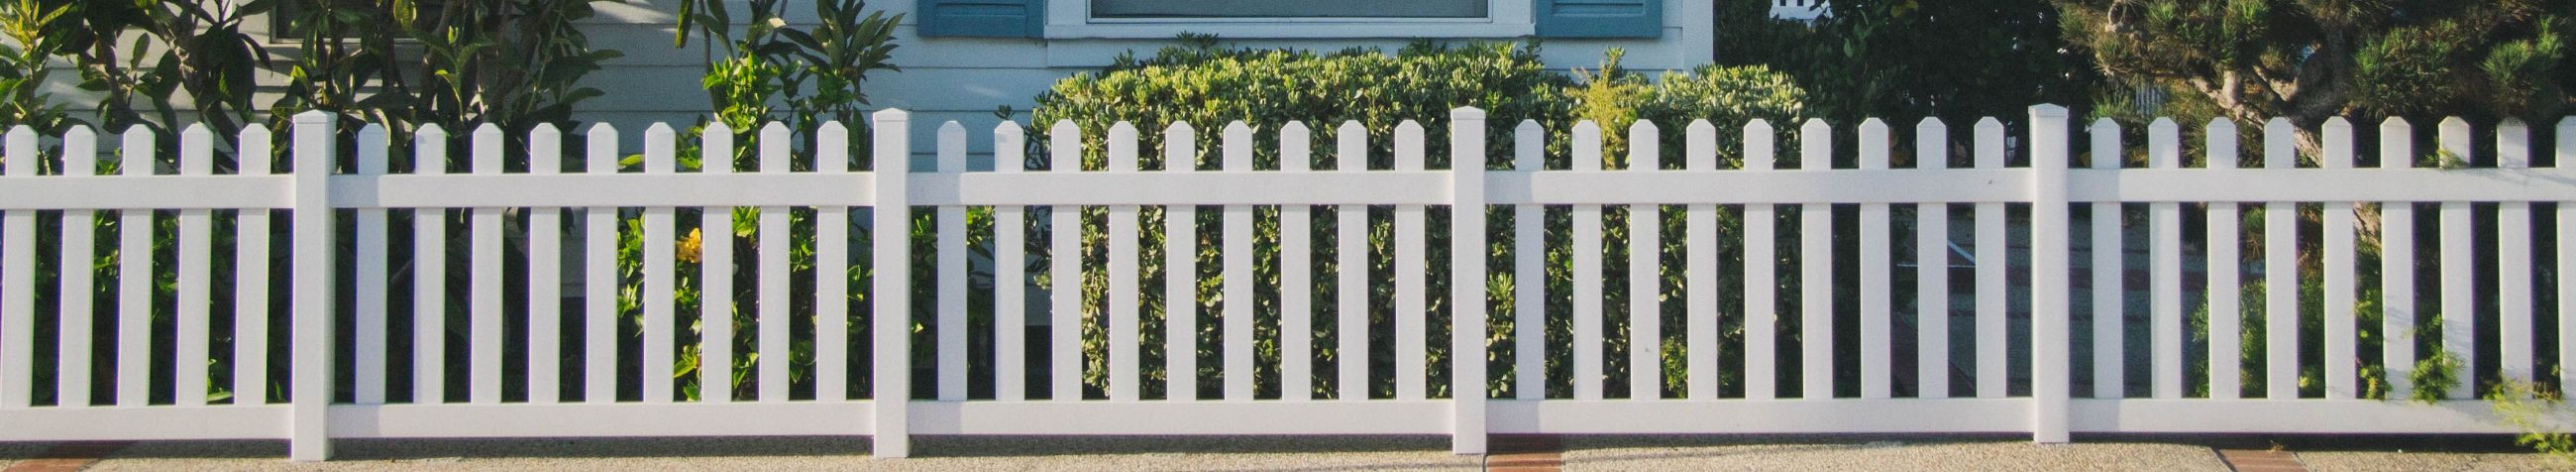 sale of gates and poles, installation of wooden fences, installation of wooden gates, installation of metal gates, installation of automatic gates, garden delivery, Installation, metalwork, Garden posts, installation of poles